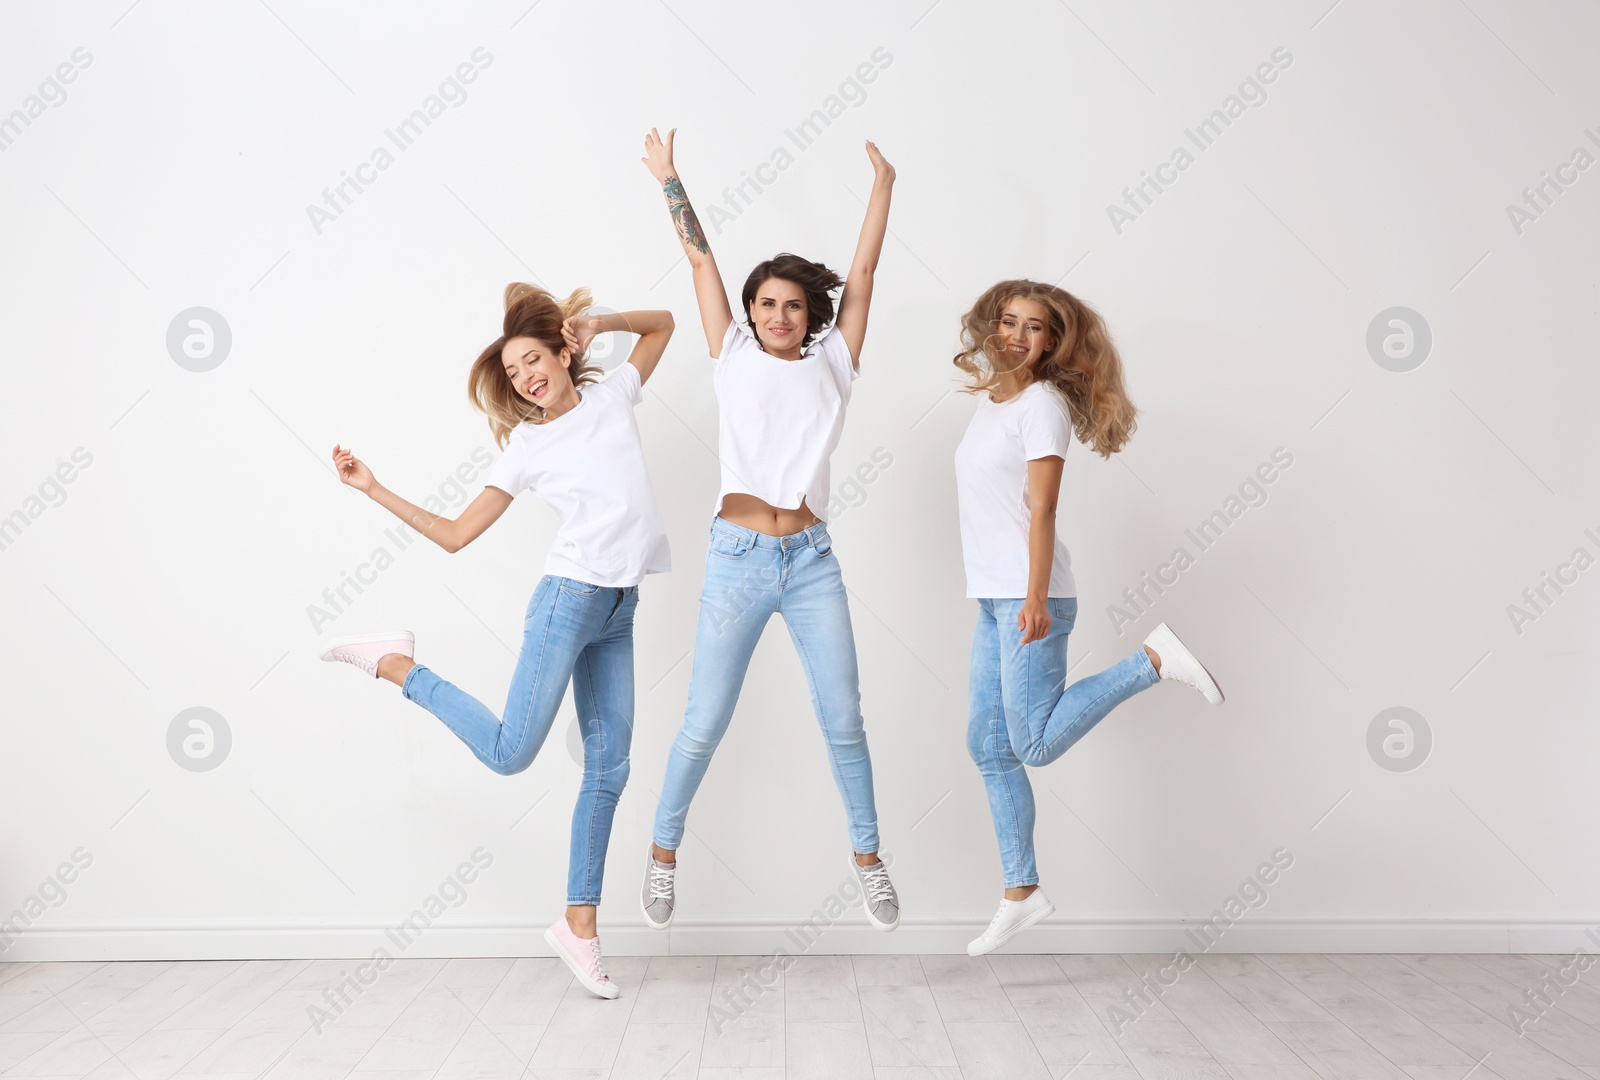 Photo of Group of young women in jeans jumping near light wall